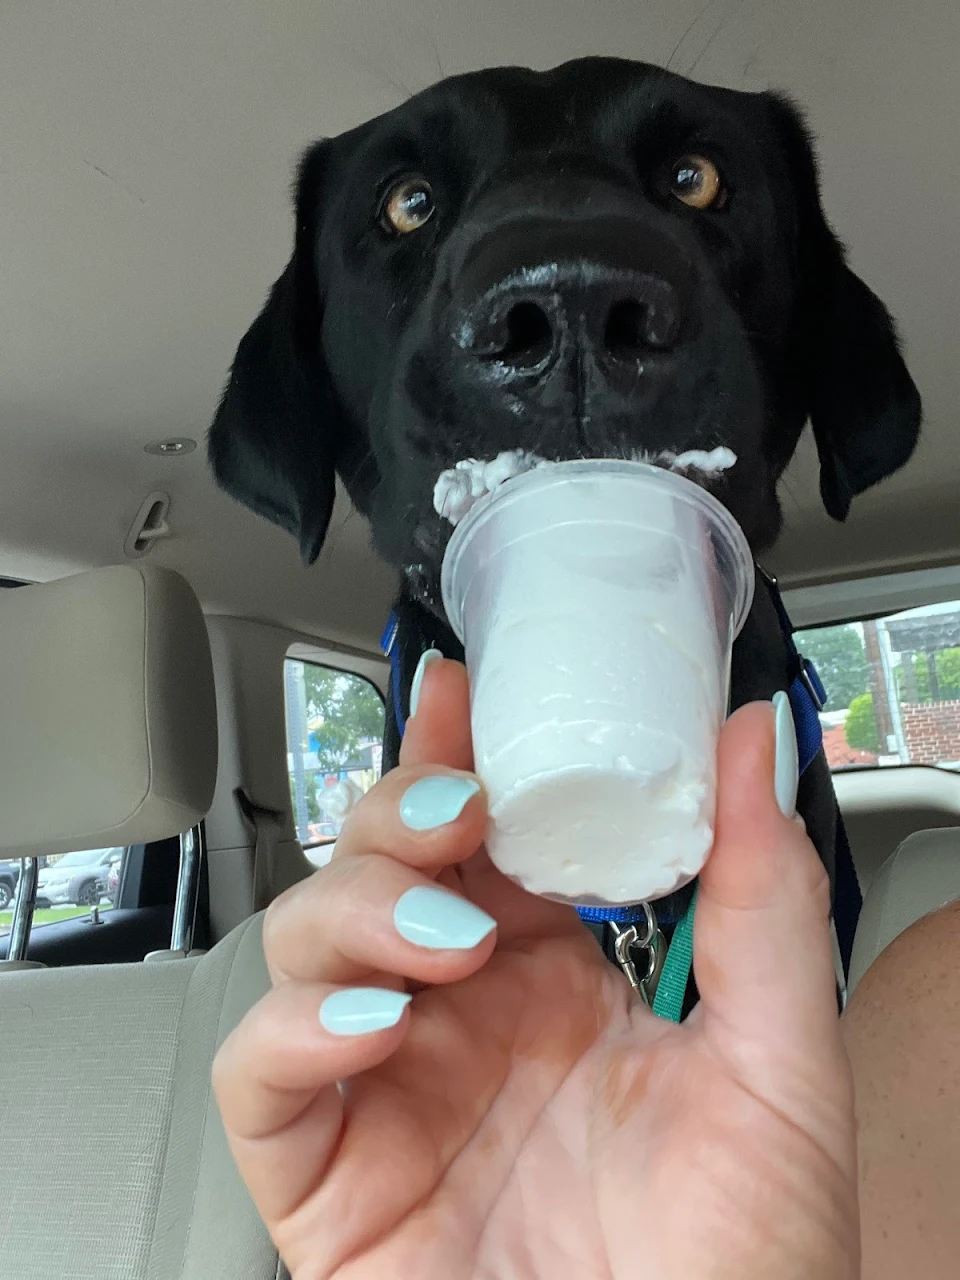 When the pup cup is so good you go cross eyed